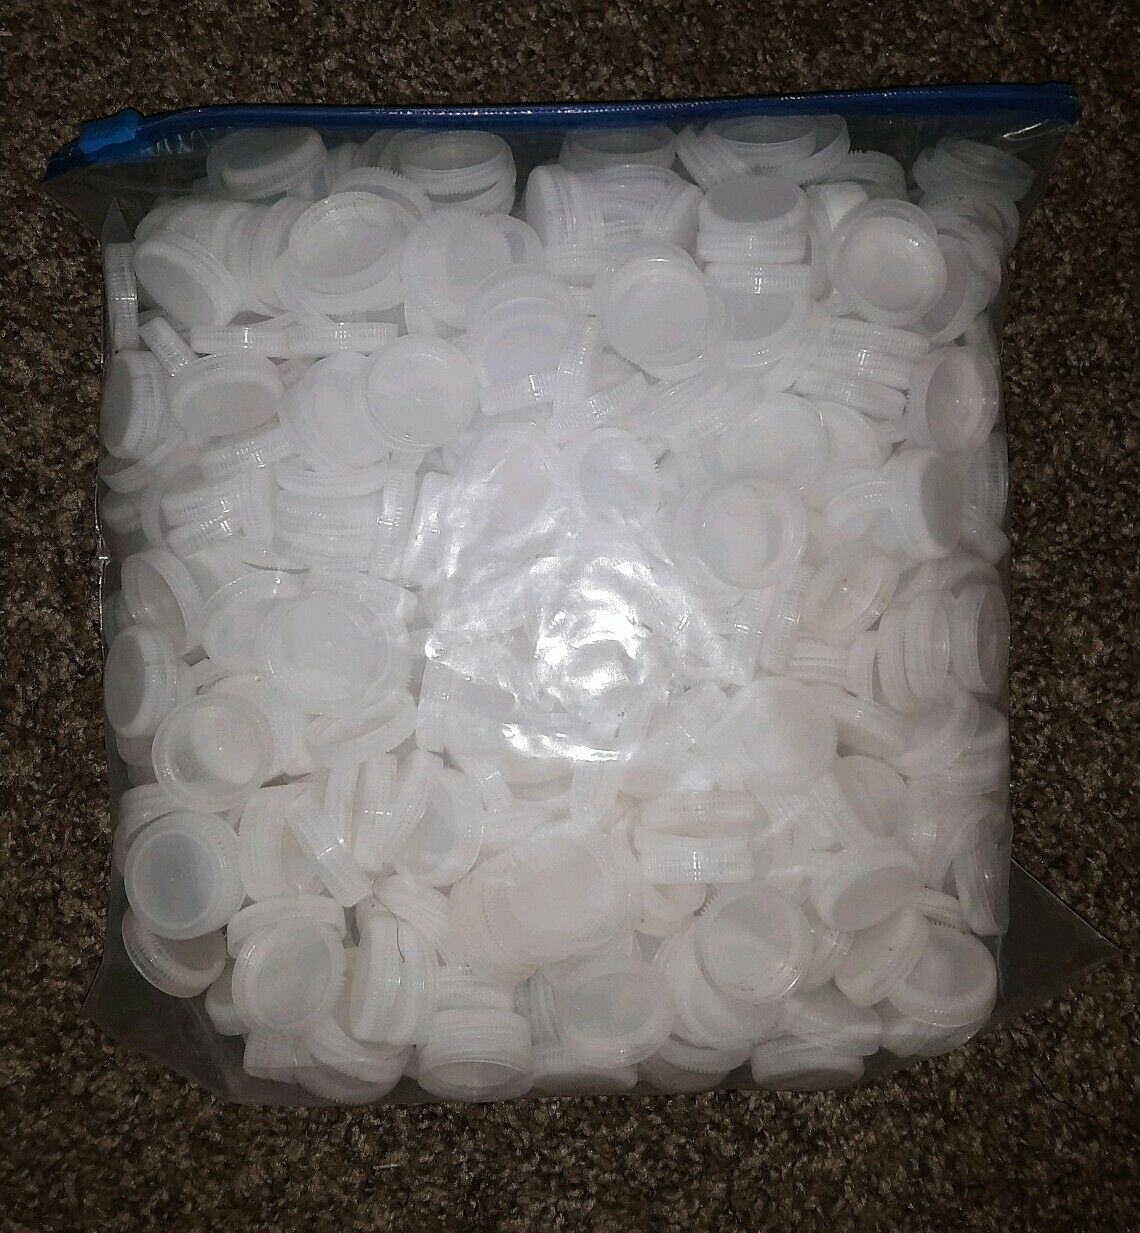 300 Clear/white Plastic Water Bottle Lids Caps Tops Art Crafts Repurpose Recycle